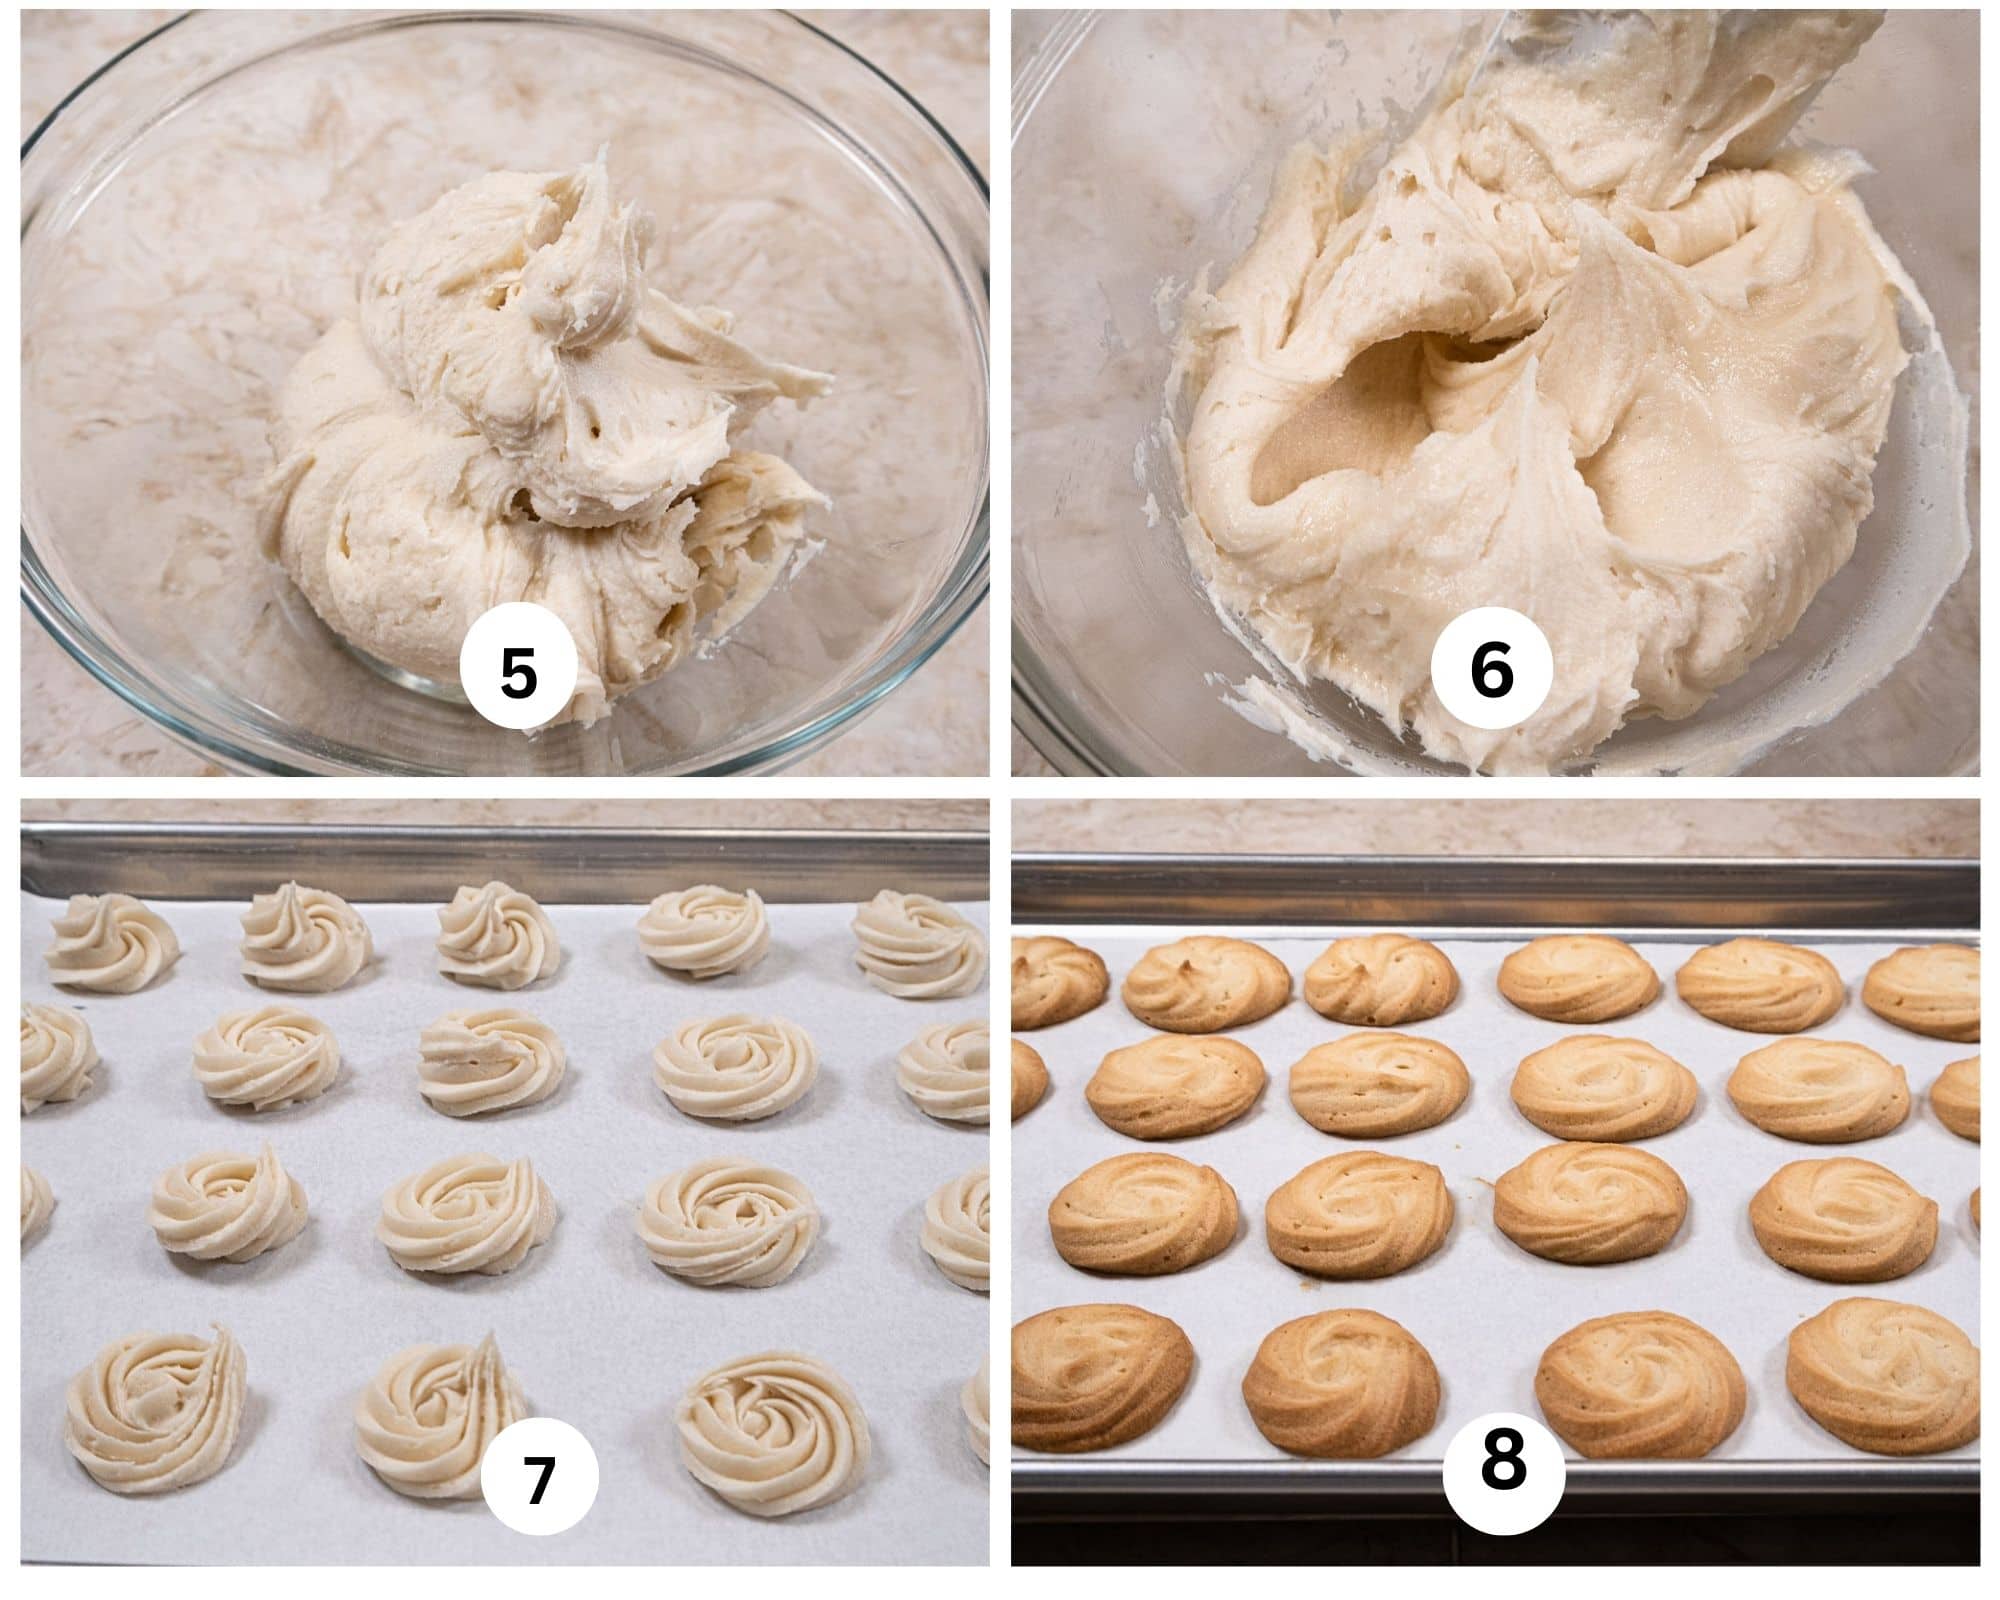 The second collage shows the batter in a bowl, the batter warmed to make it easier to pipe, the piped cookies on a baking sheet and the baked cookies.